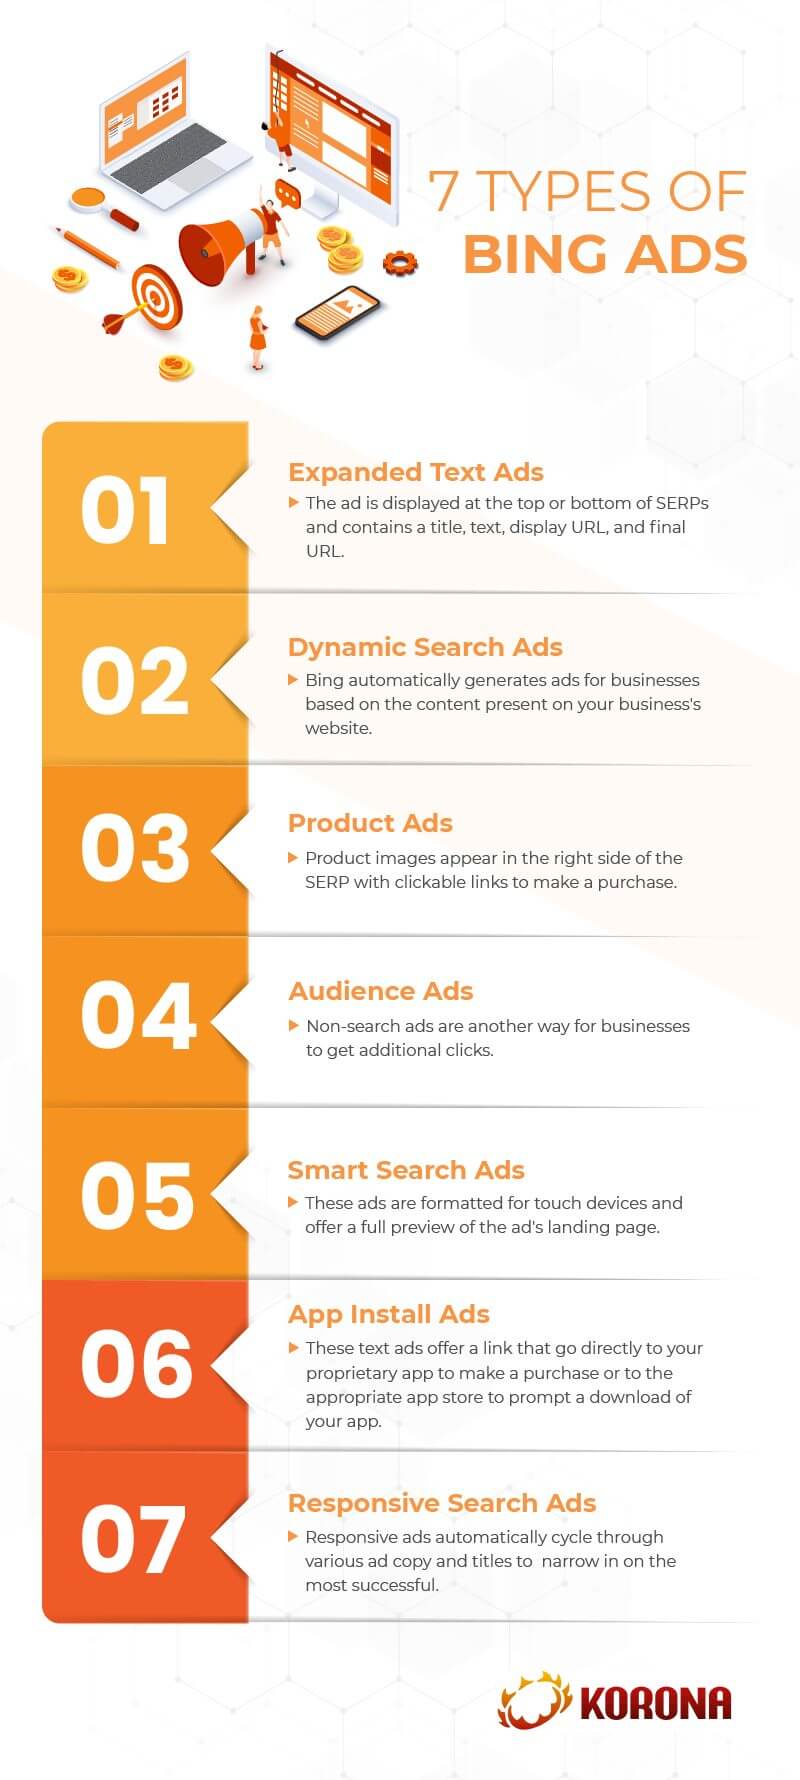 an infographic showing 7 types of bing ads